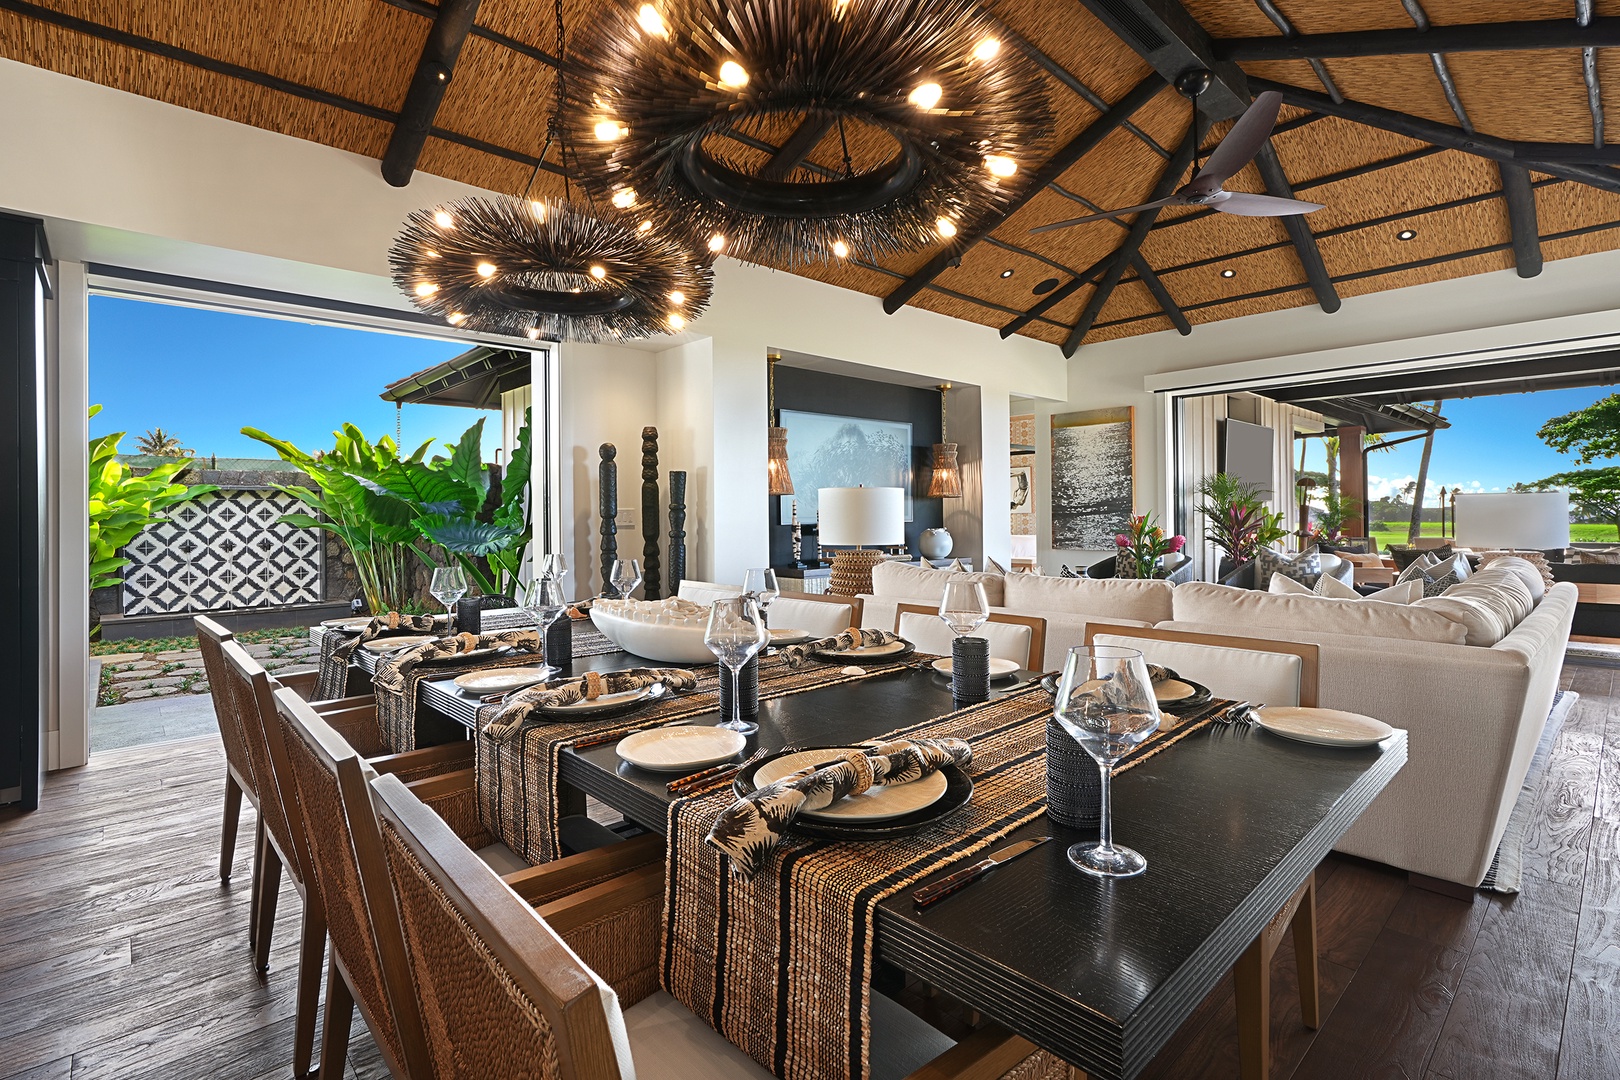 Koloa Vacation Rentals, Hale Pakika at Kukui'ula - Elegant appointments at the dining area with table for eight.